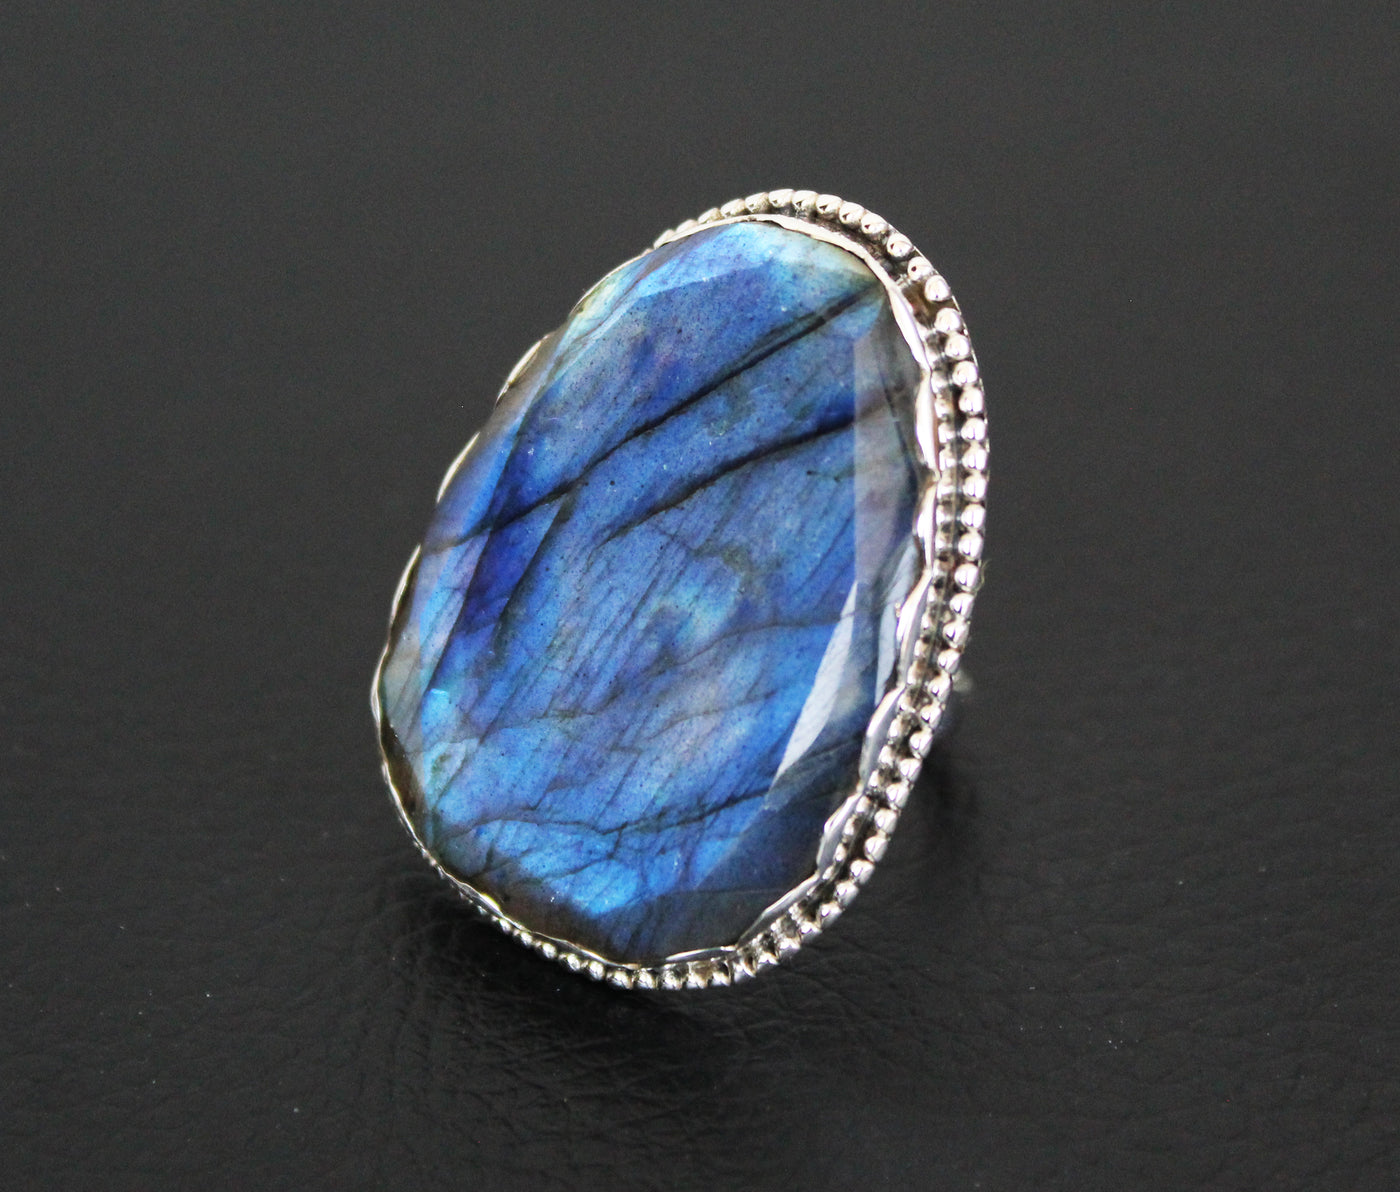 Natural Blue Labradorite Ring, Sterling Silver, Blue Stone Ring, Gemstone Ring, , Everyday Ring, Labradorite Jewelry, Minimal Ring, BohoSilver Labradorite Ring, Silver Stacking Ring, Labradorite Silver Ring, Silver Gemstone Ring, Birthstone Jewelry,Boho Jewelry,Cocktail Ring